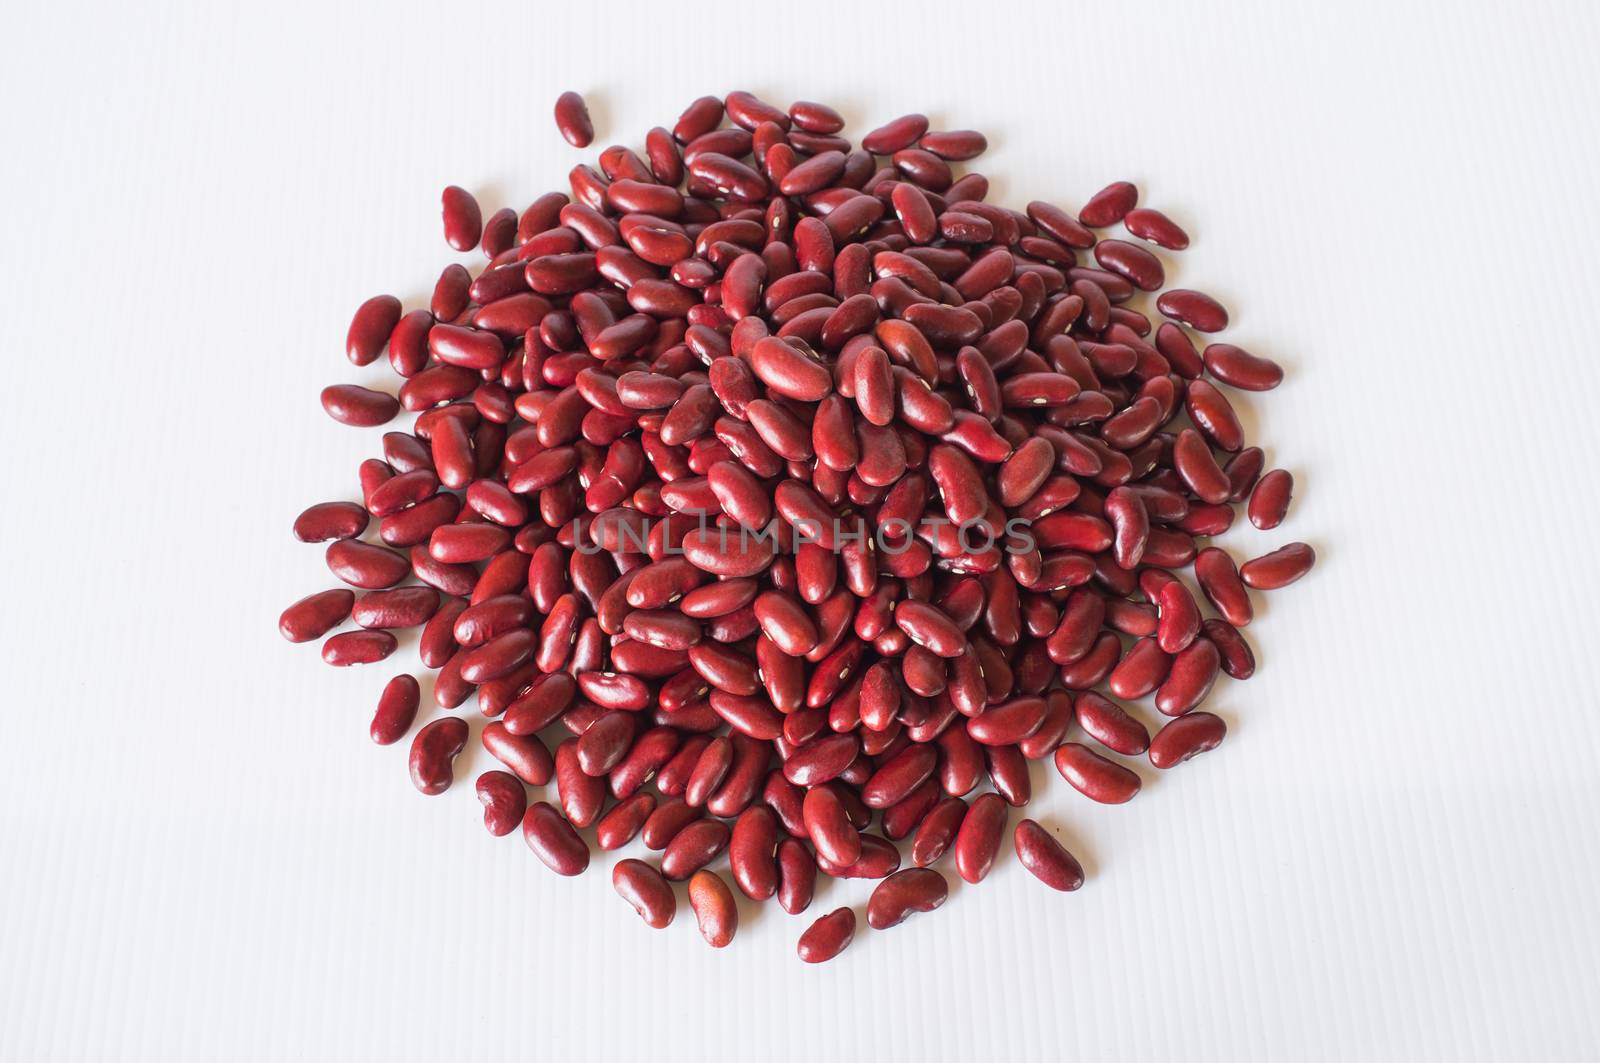 red beans on corrugated plastic by koson